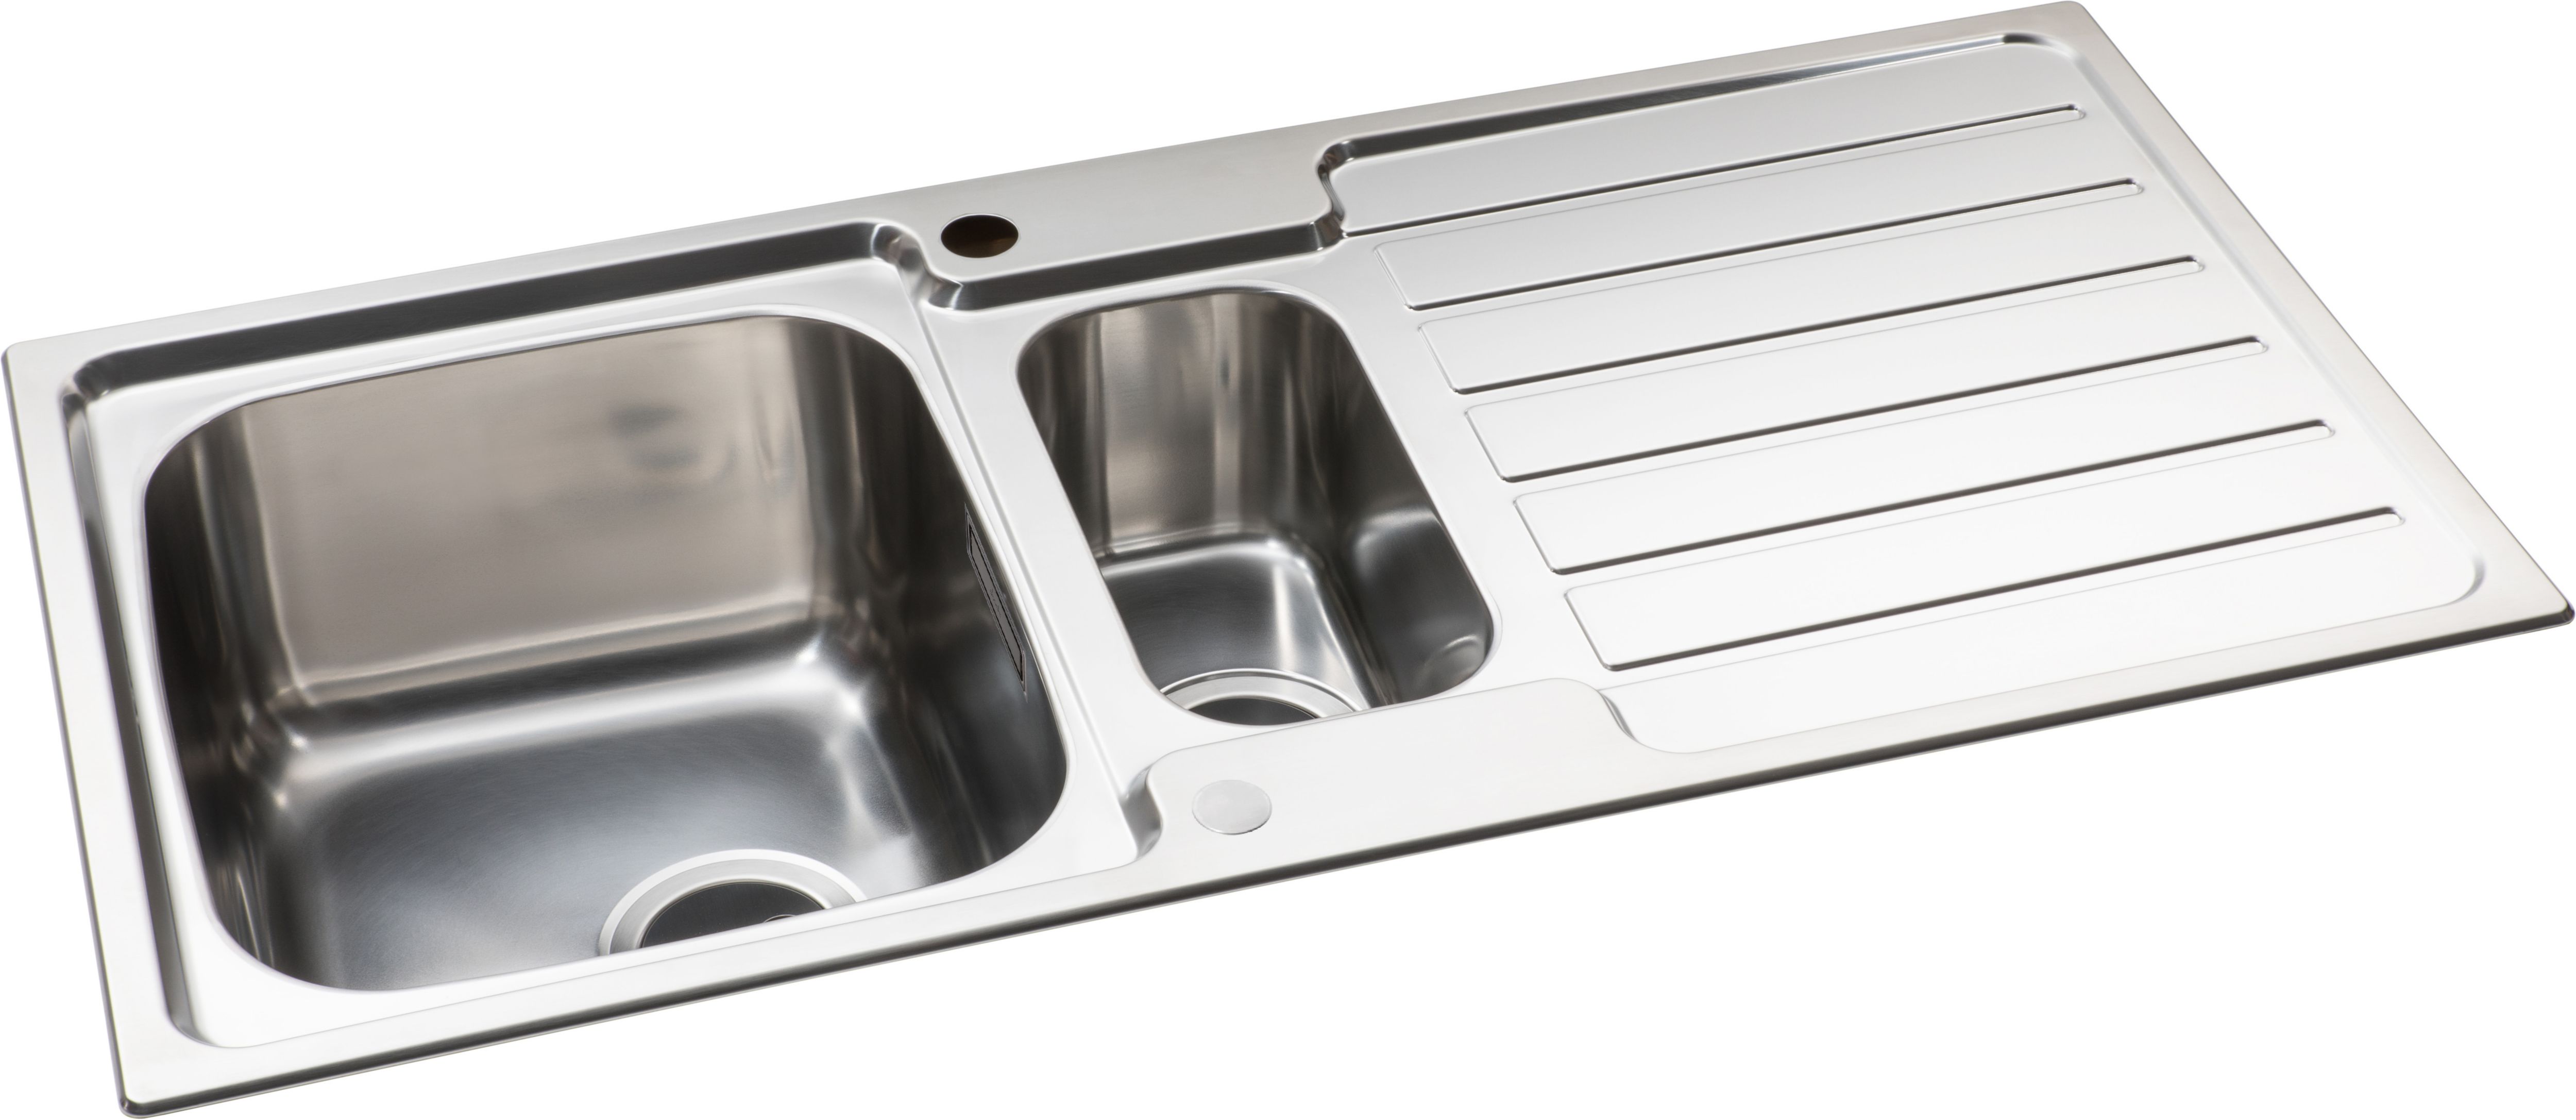 Image of Neron 1.5 Bowl Stainless Steel Kitchen Sink